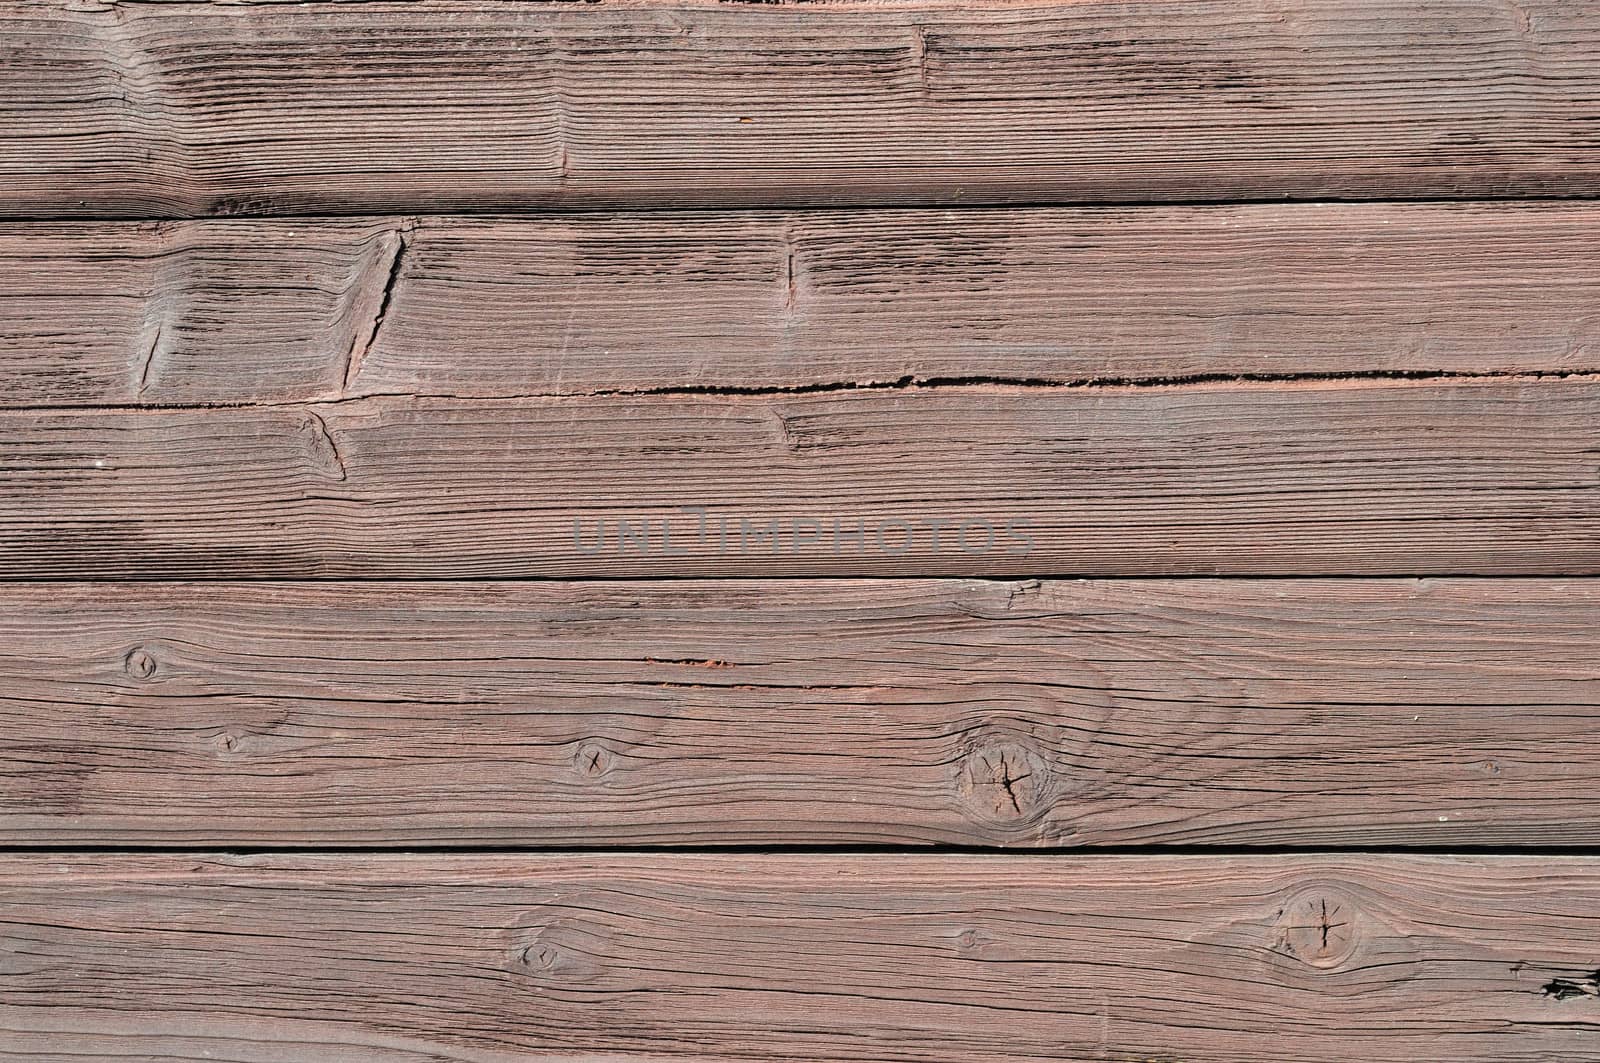 Rough brown wooden boards background by wander